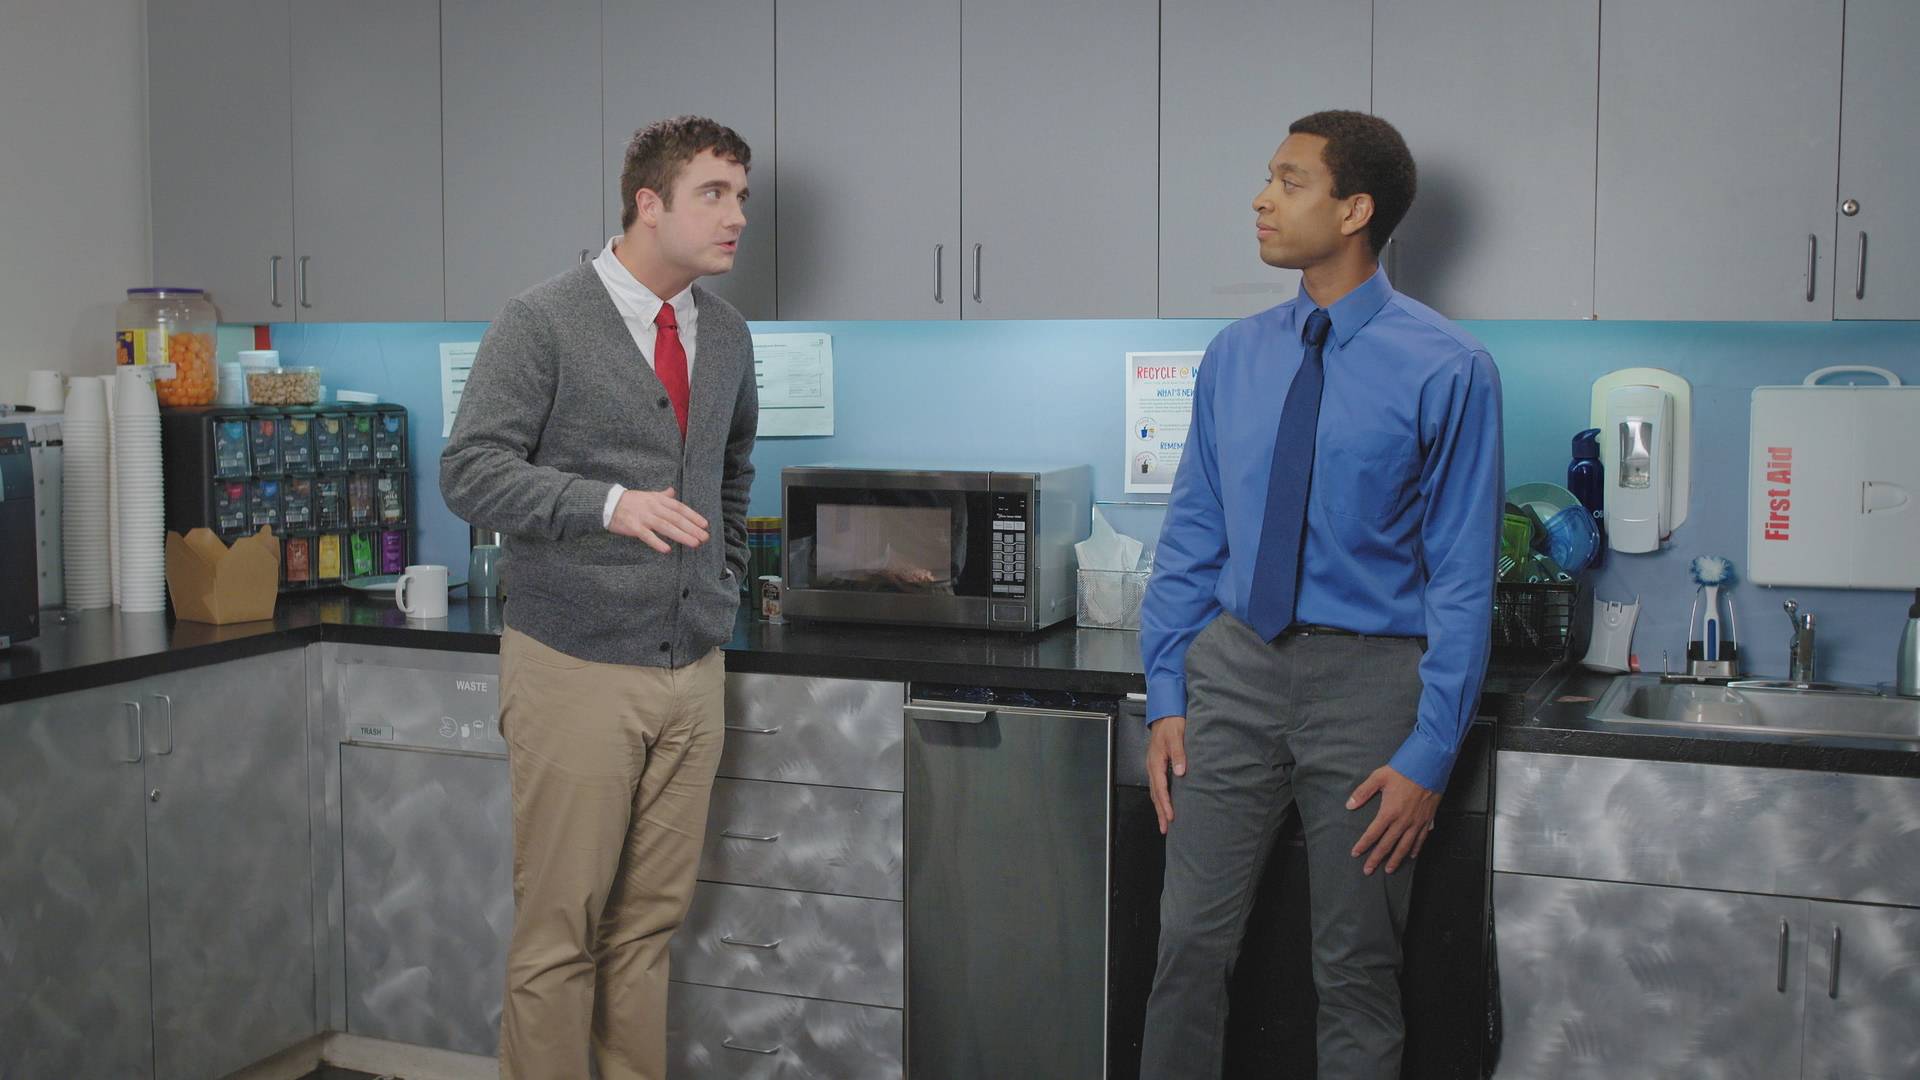 The Classic Office Microwave Fight, The Office